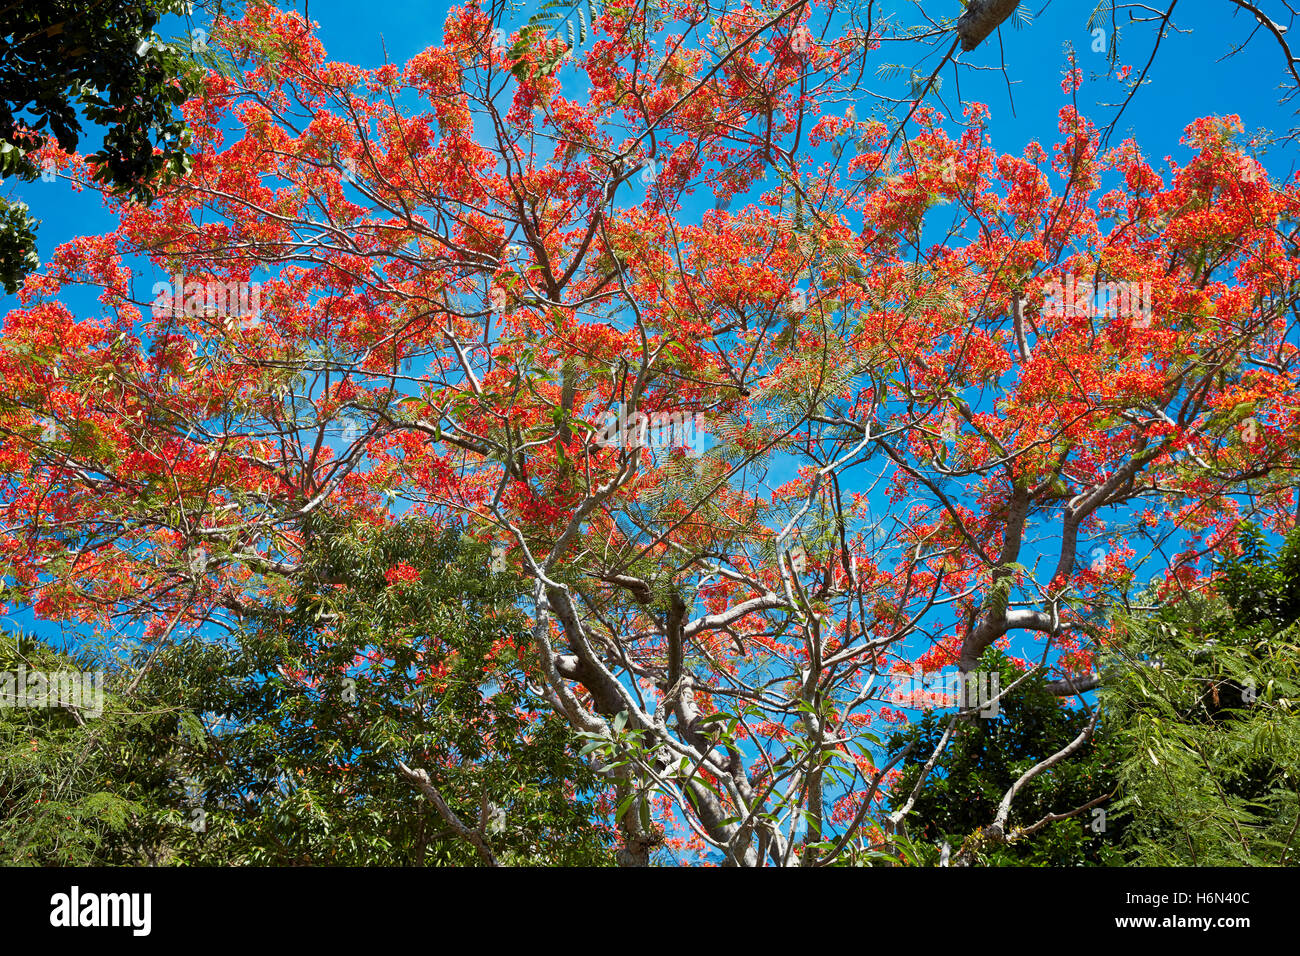 Flowering branches of Royal Poinciana (Flame Tree). Scientific name: Delonix regia. Marble Mountains, Ngu Hanh Son District, Vietnam. Stock Photo